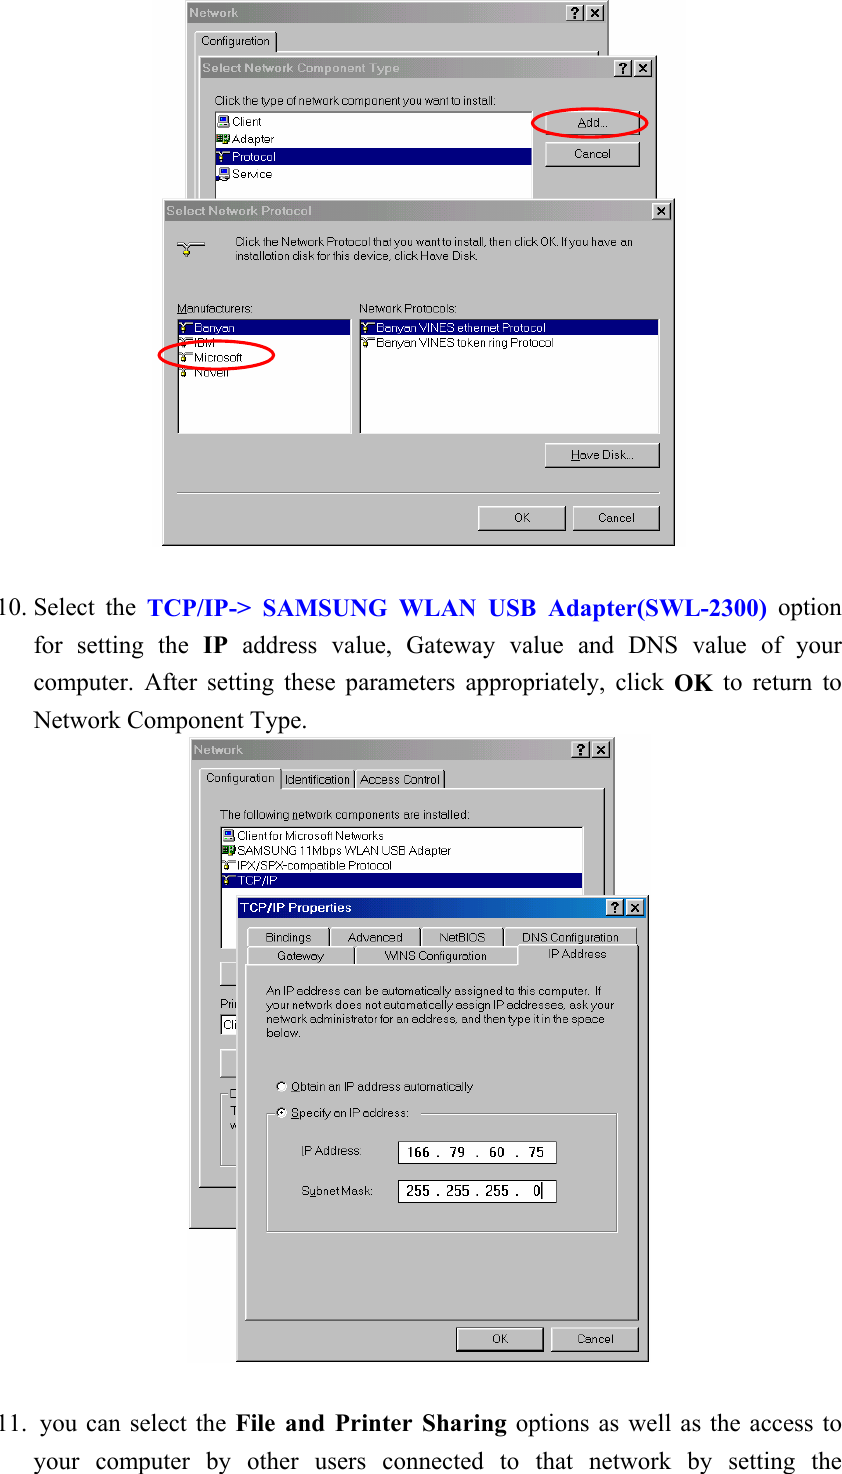    10. Select the TCP/IP-&gt; SAMSUNG WLAN USB Adapter(SWL-2300) option for setting the IP address value, Gateway value and DNS value of your computer. After setting these parameters appropriately, click OK to return to Network Component Type.   11.  you can select the File and Printer Sharing options as well as the access to your computer by other users connected to that network by setting the 